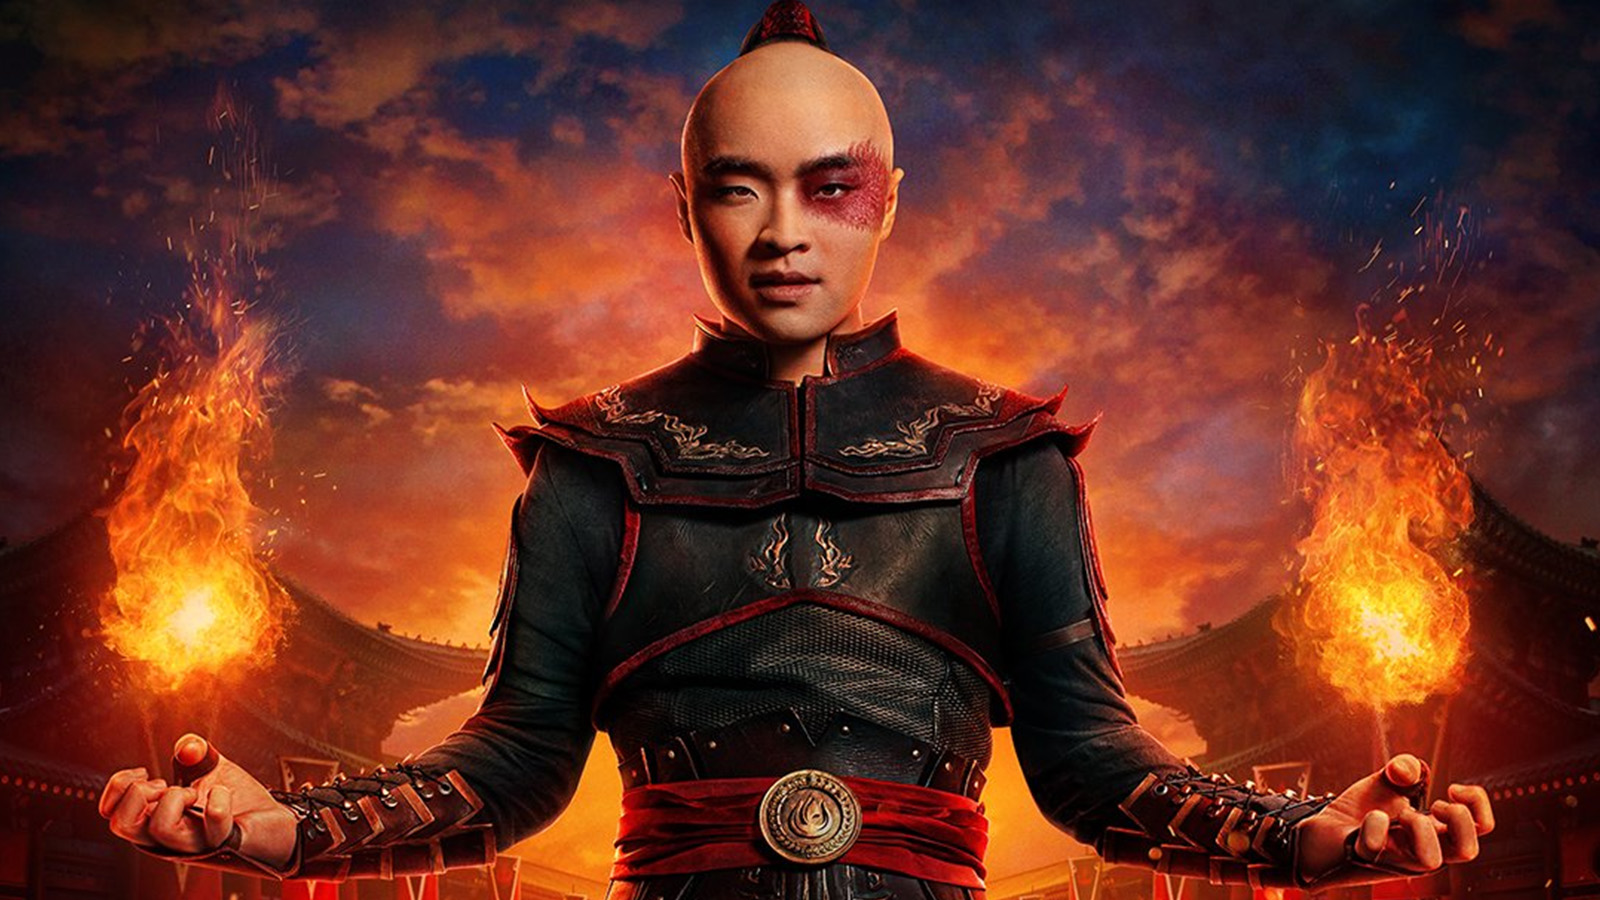 Zuko Avatar live action actor: Who plays the fiery prince?